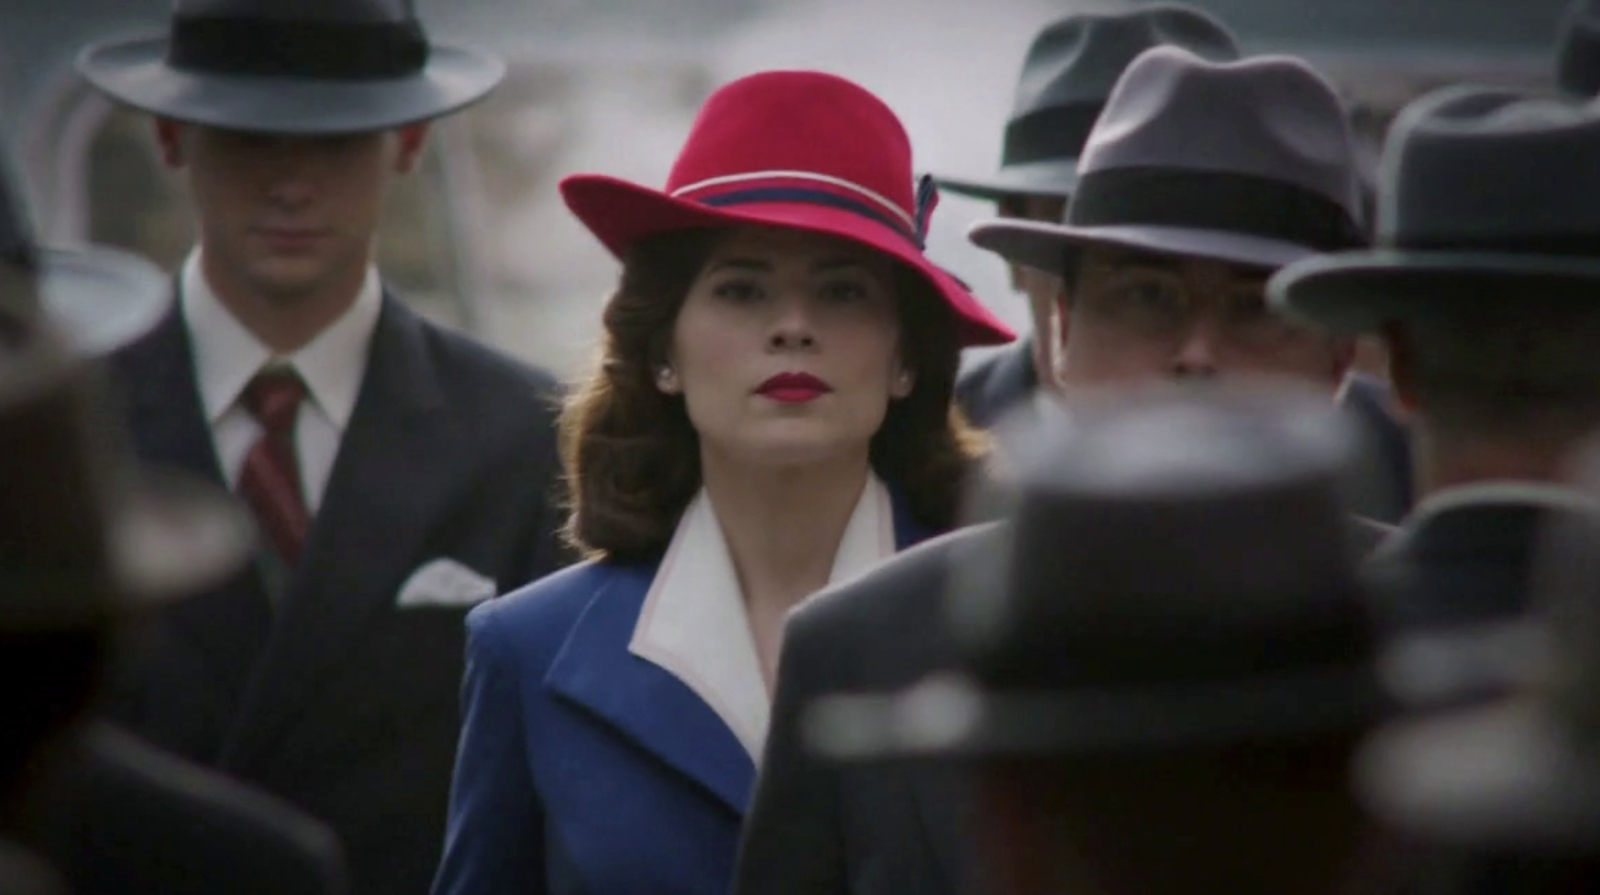 Hayley Atwell as Peggy Carter in a hat and suit amid a crowd of men in hats and suits